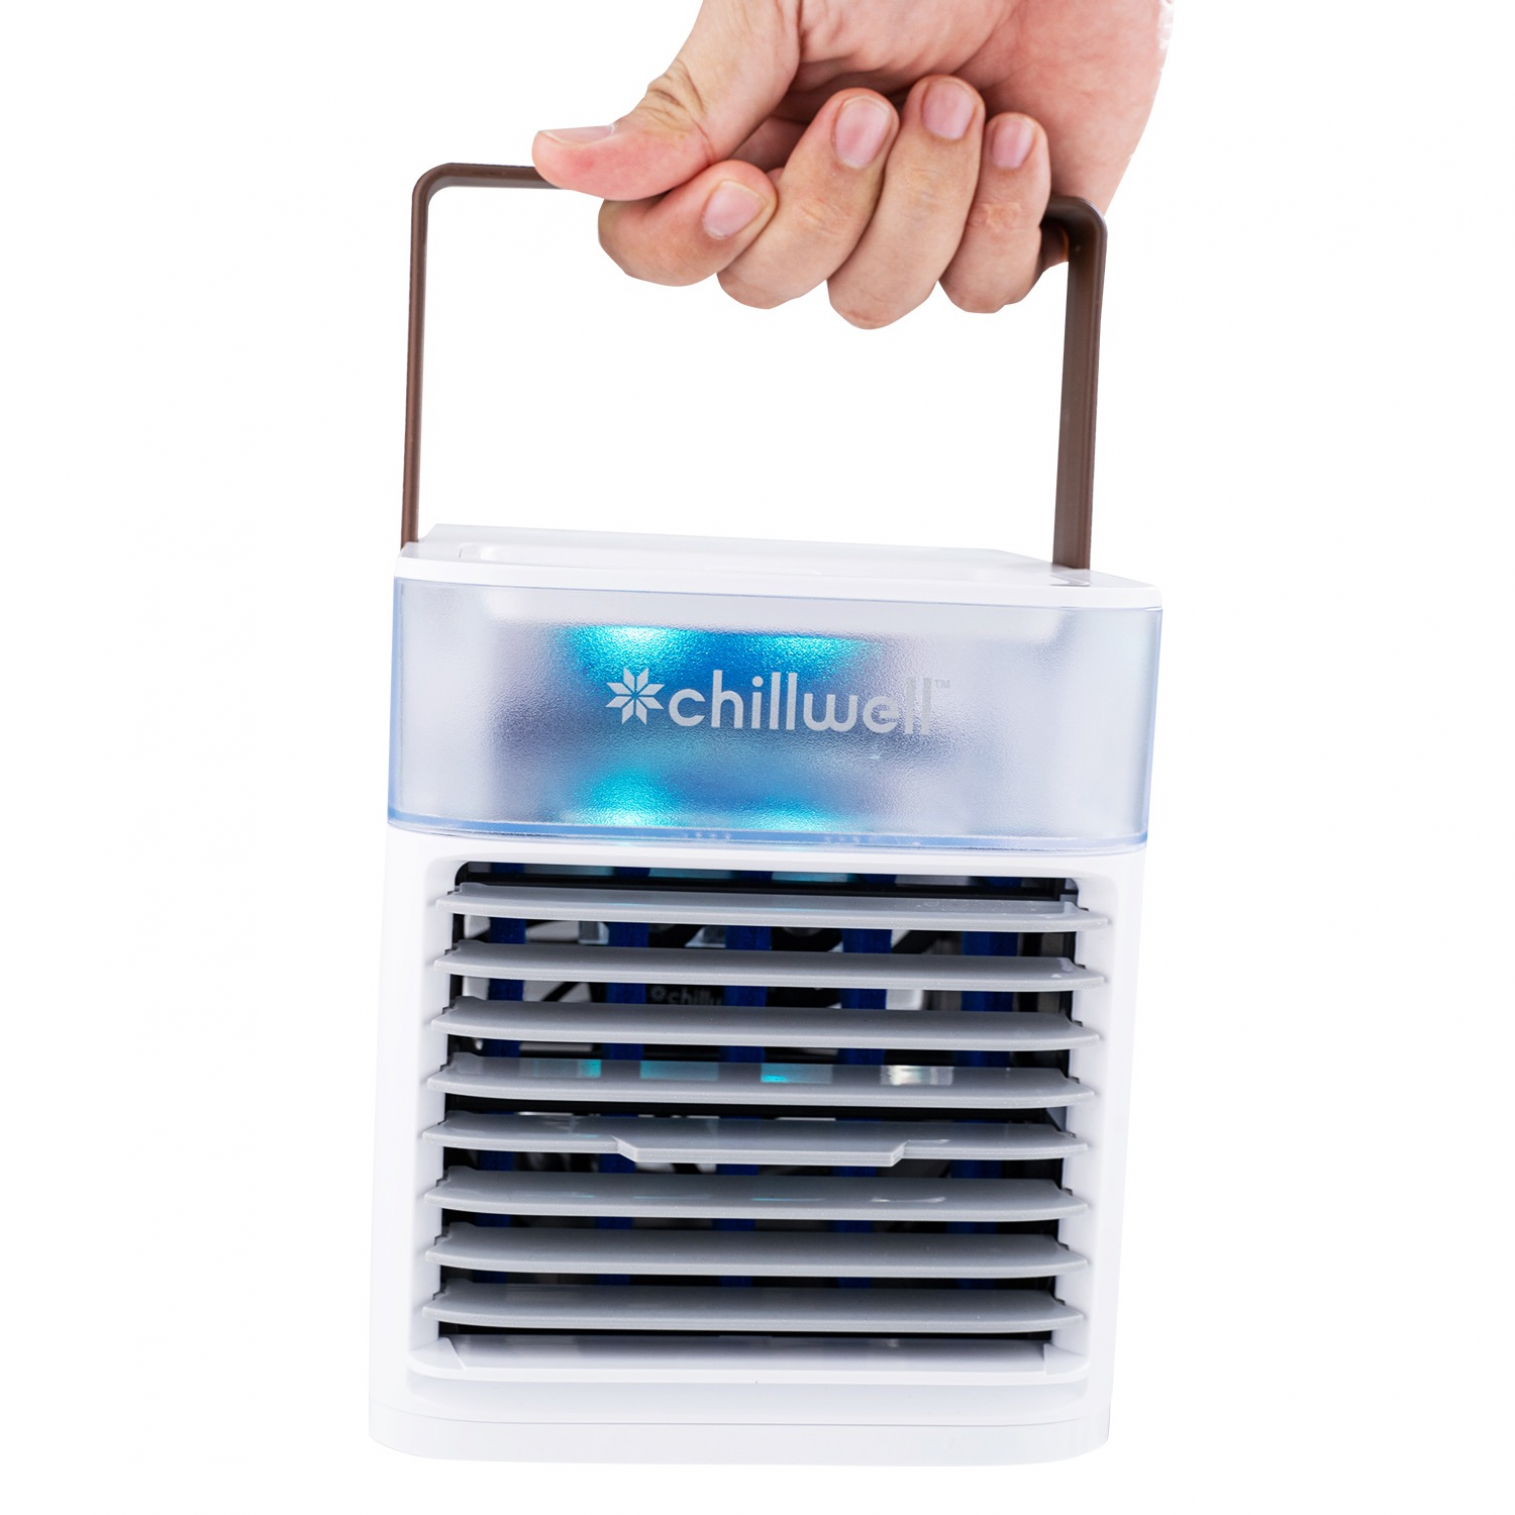 Real Customer Review Of Chillwell Ac